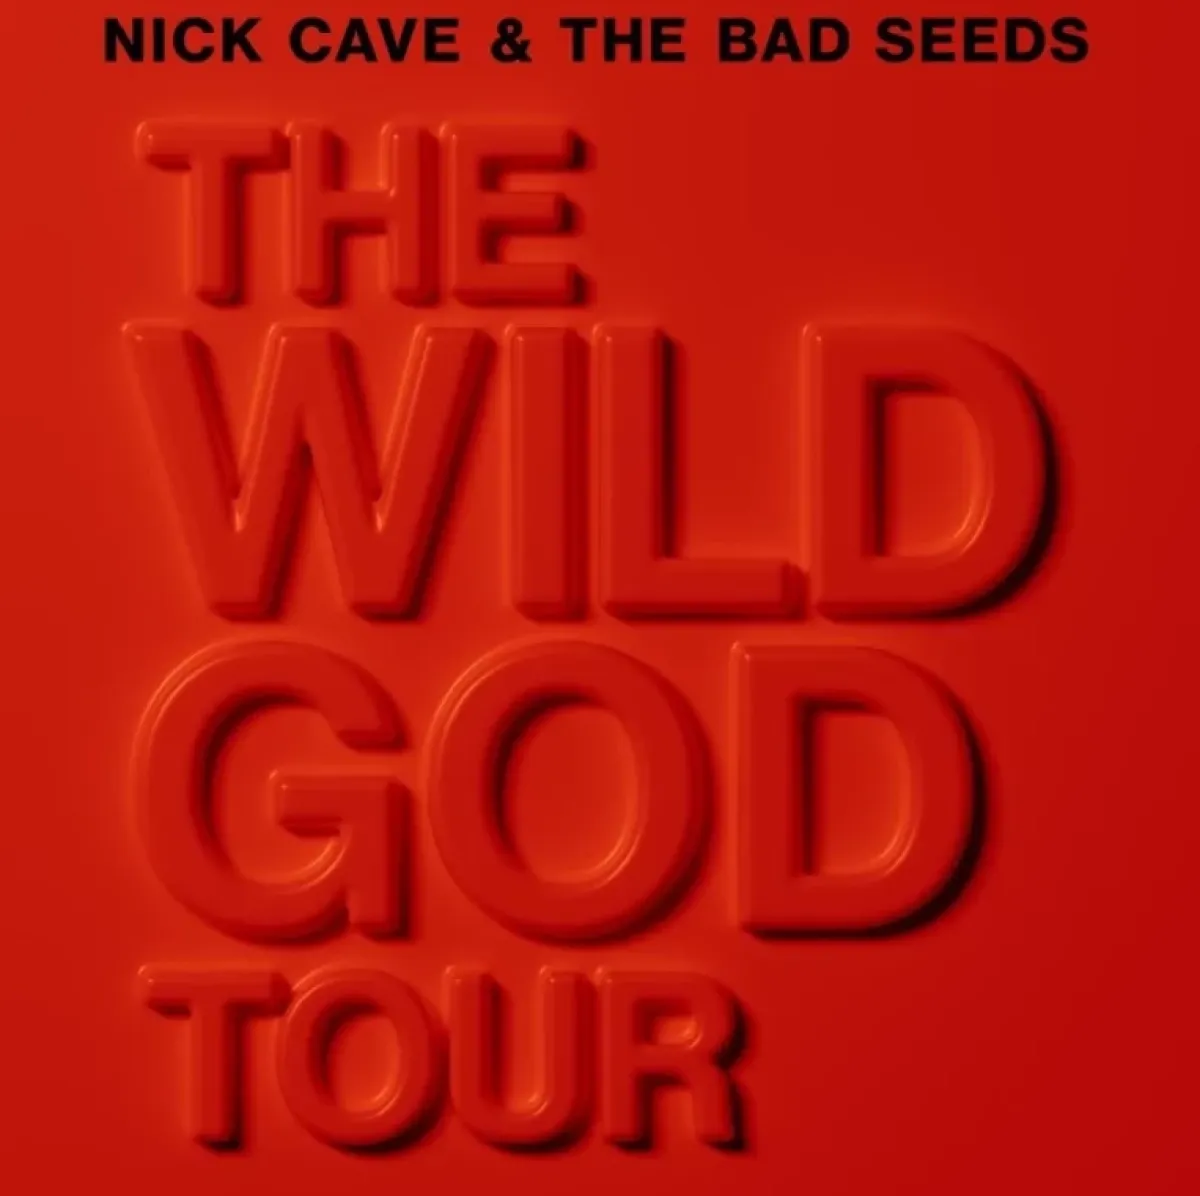 Nick Cave and the Bad Seeds at Ziggo Dome Tickets